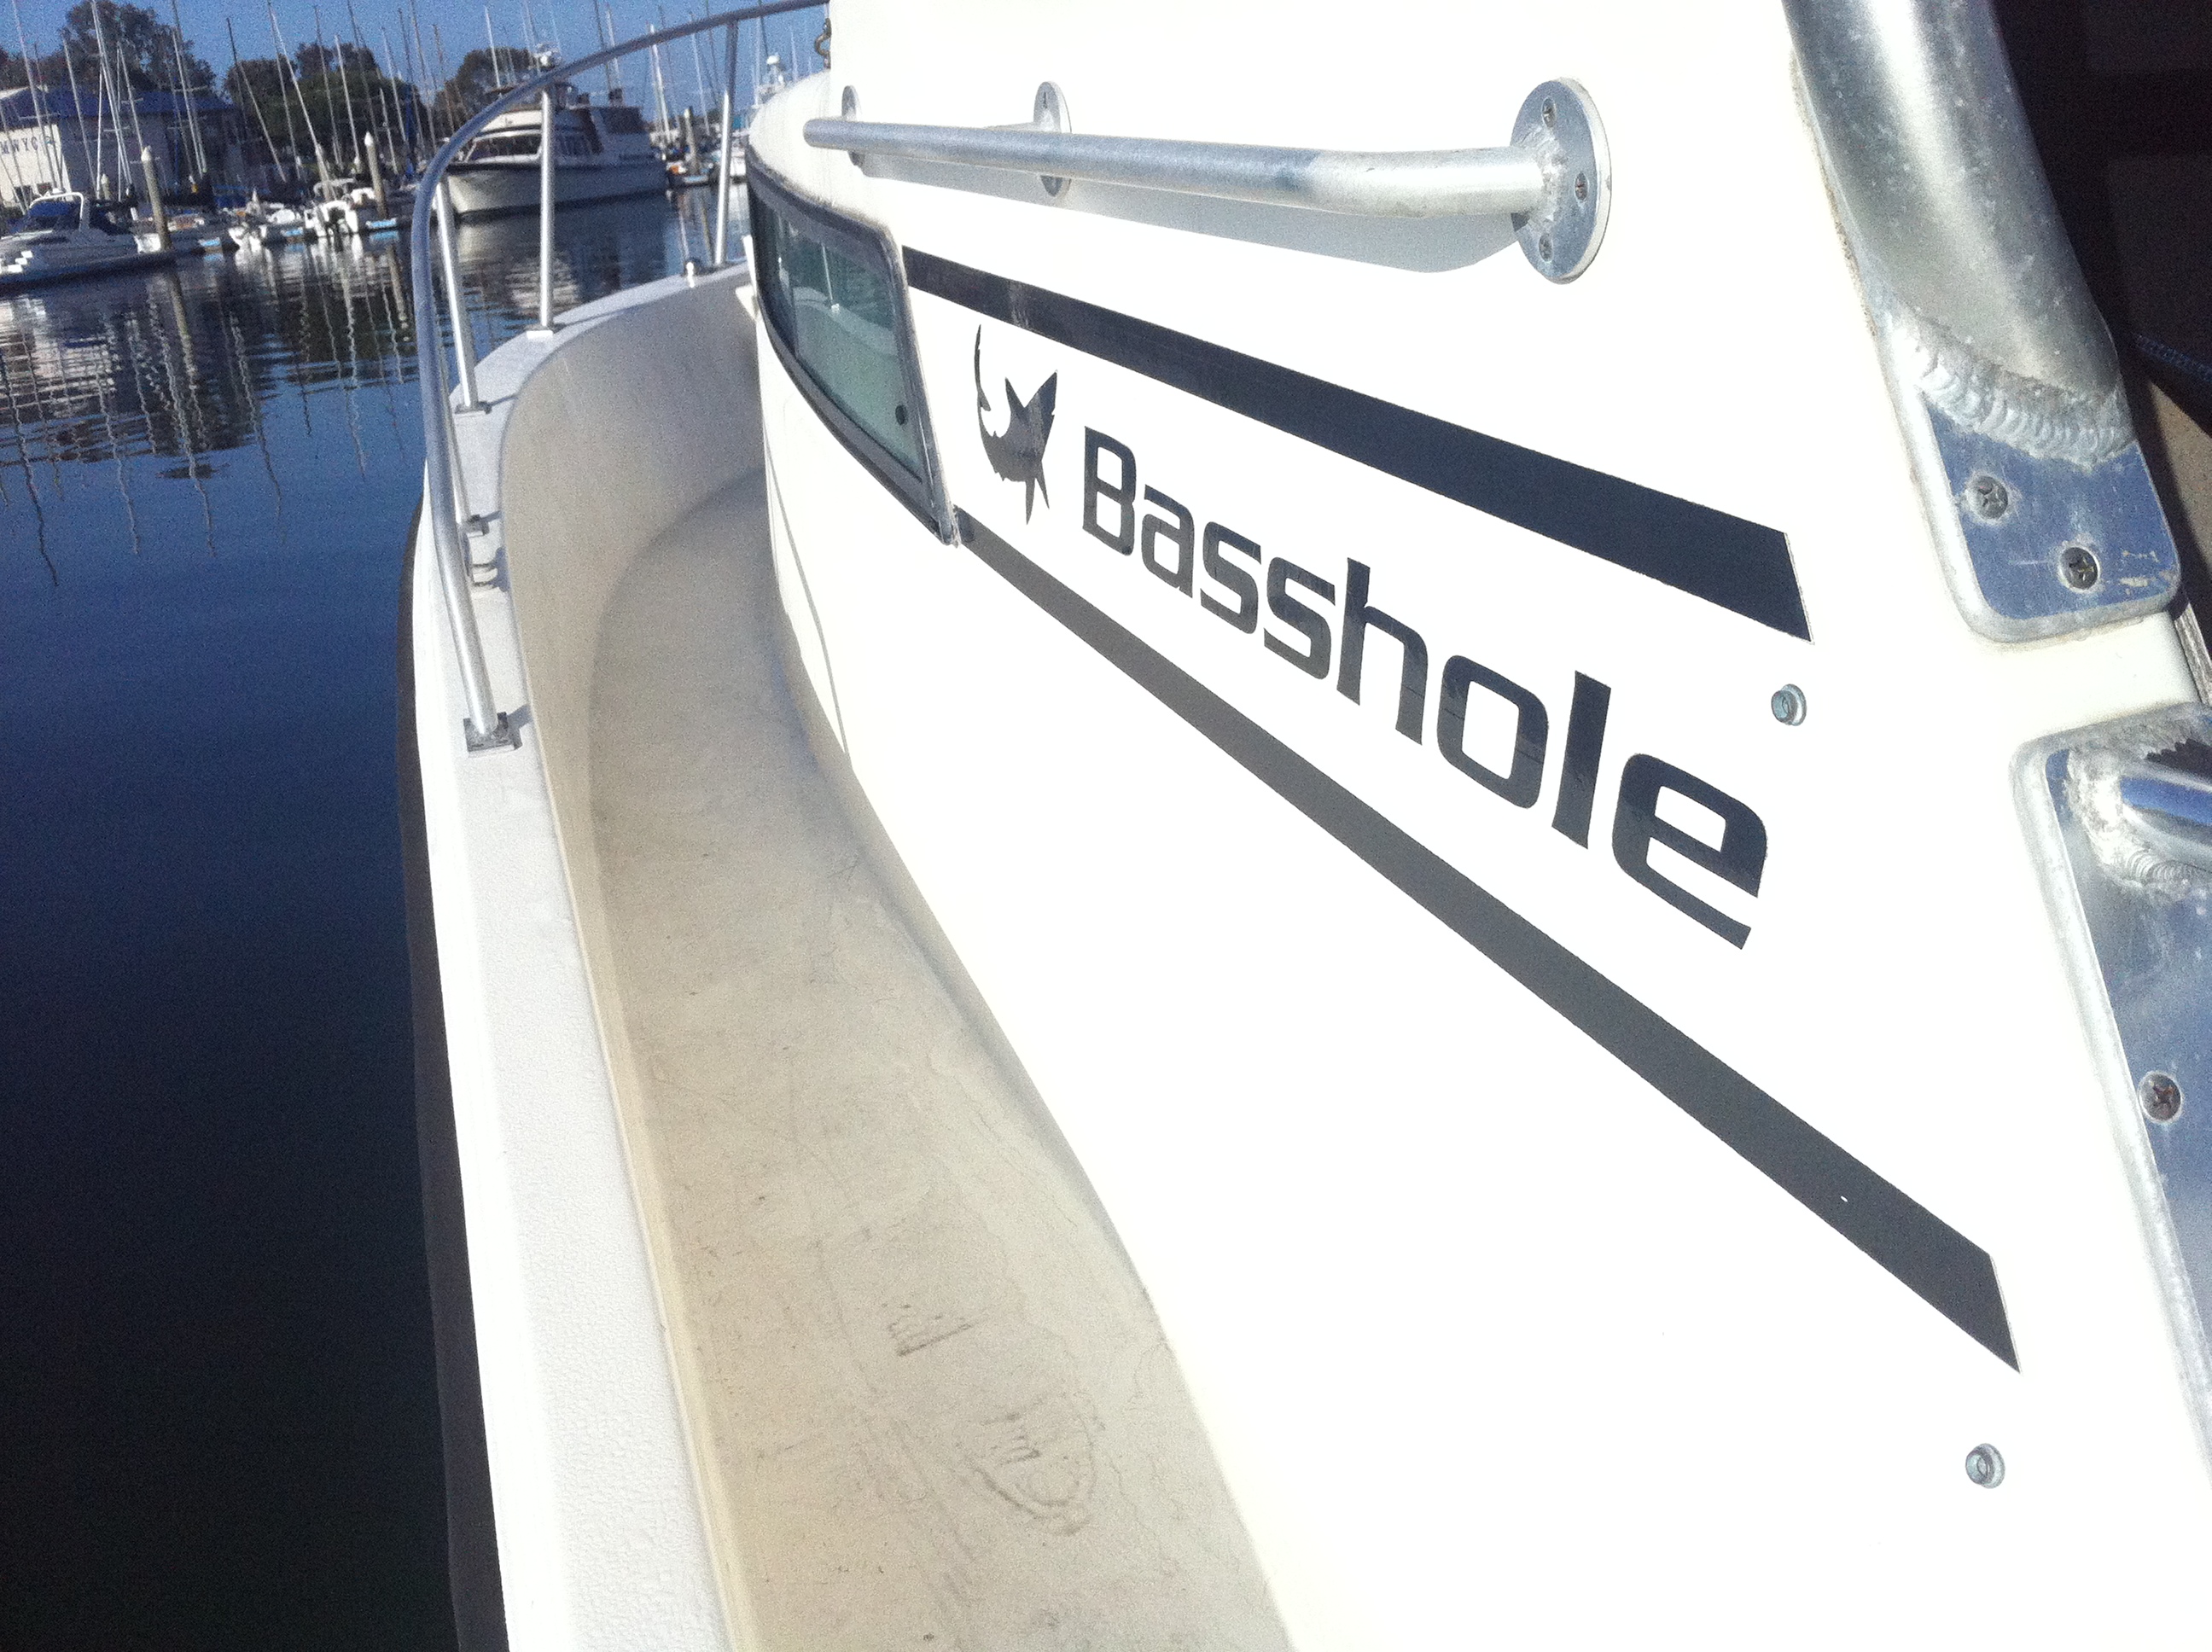 Trip Report: Halibut Drifting On The Basshole